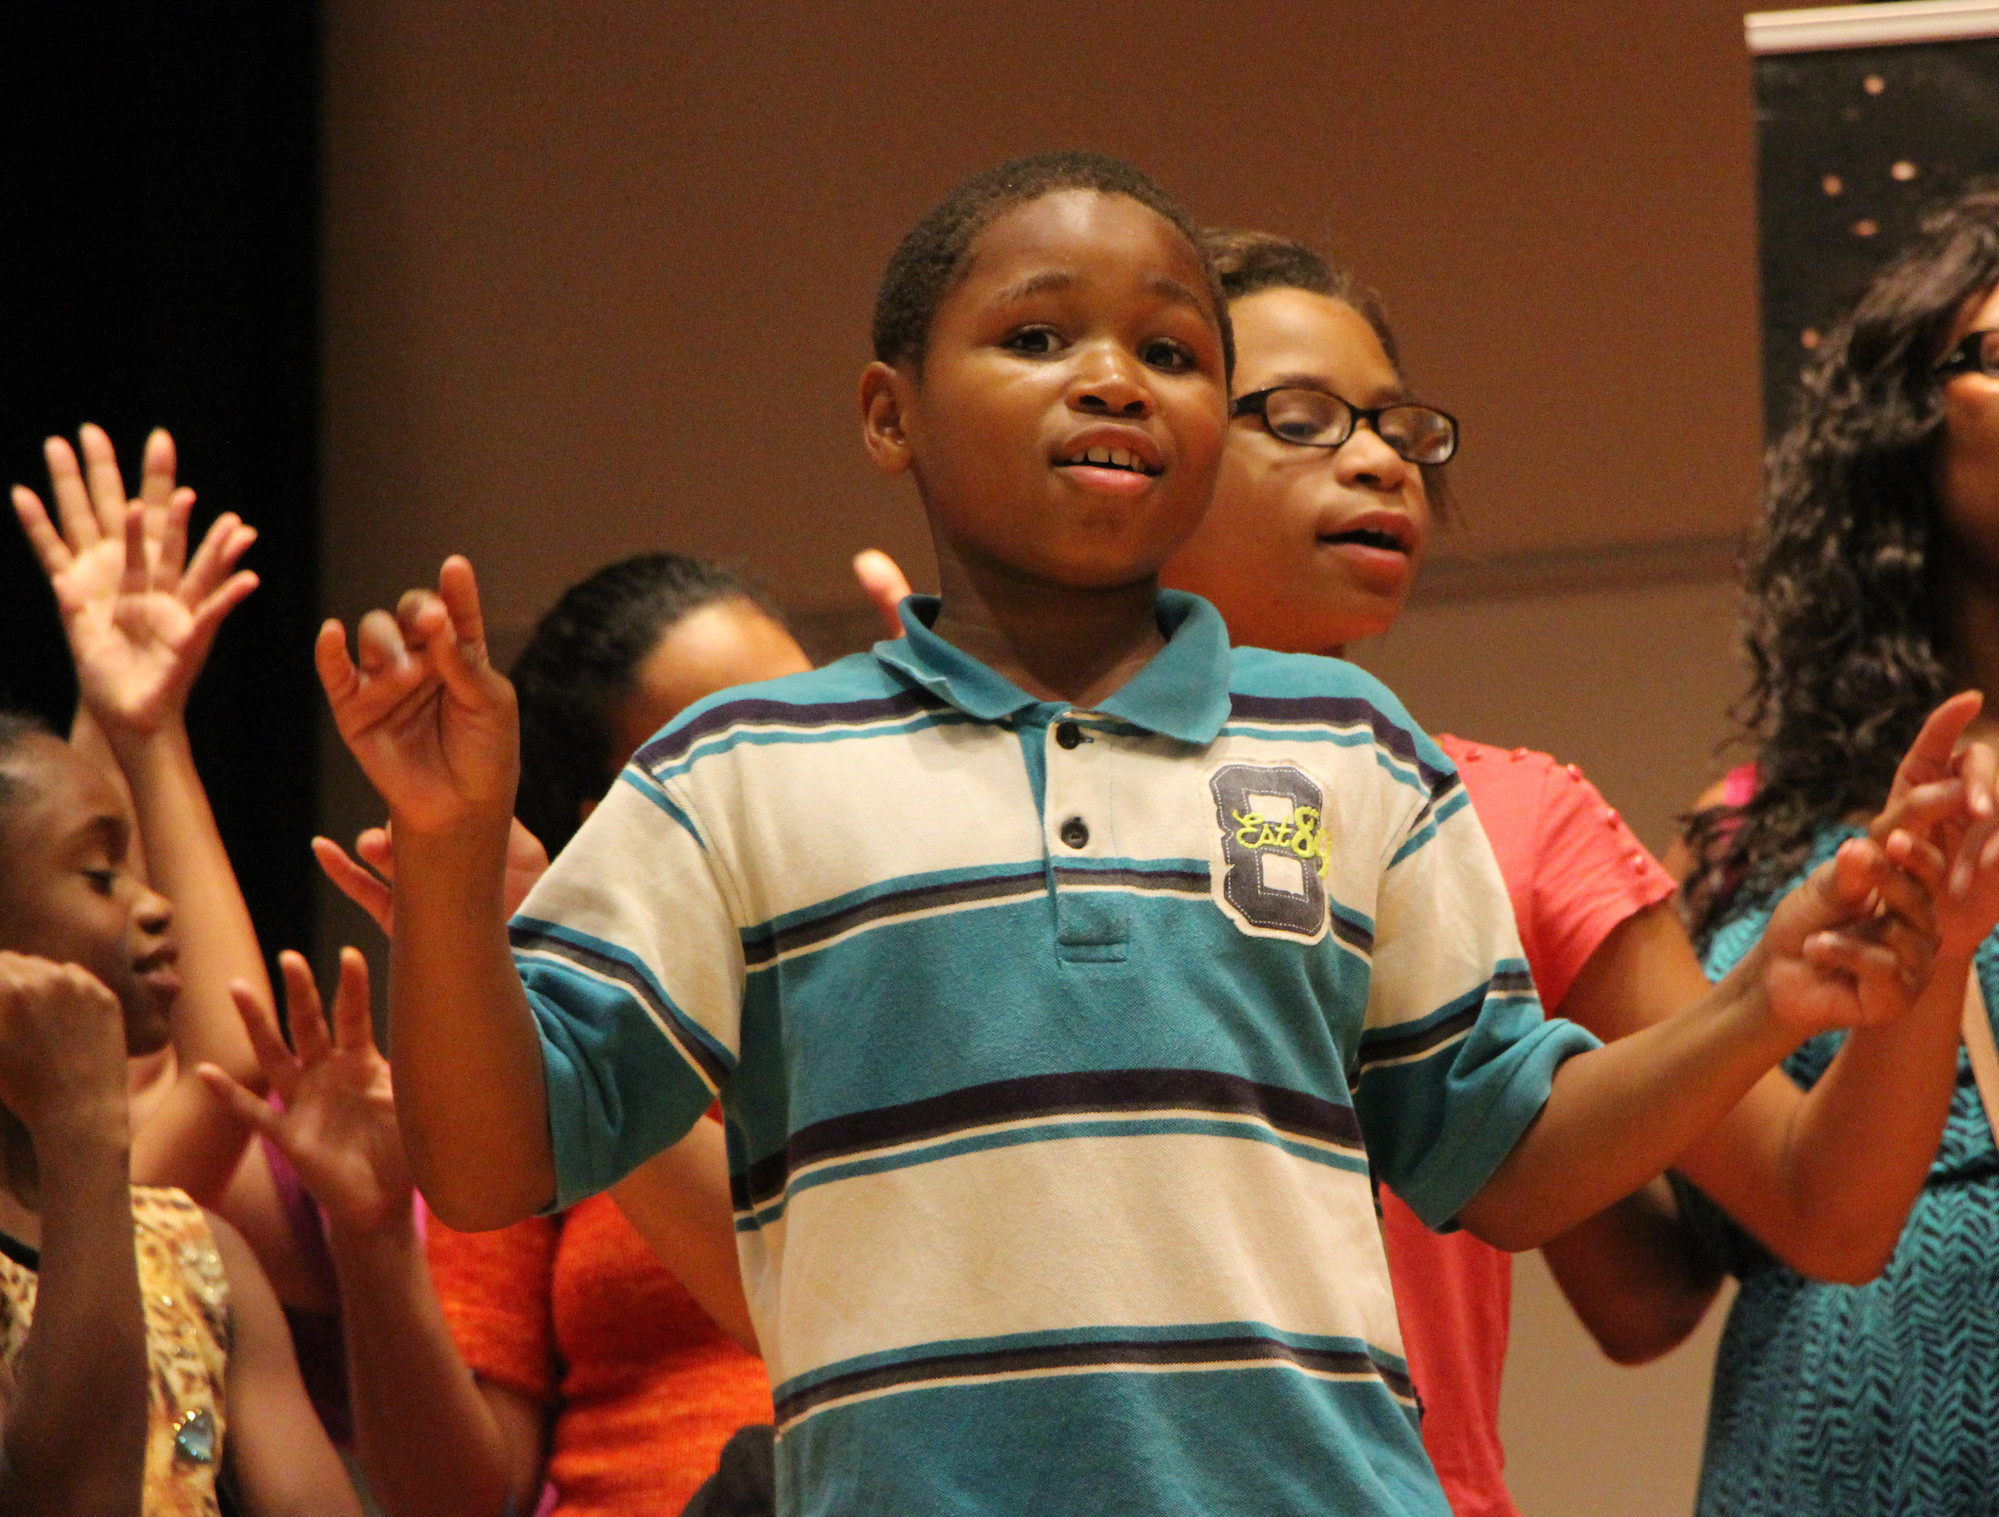 David Achonu, 8, loved being on stage with his friends from the Summer Reading Club.